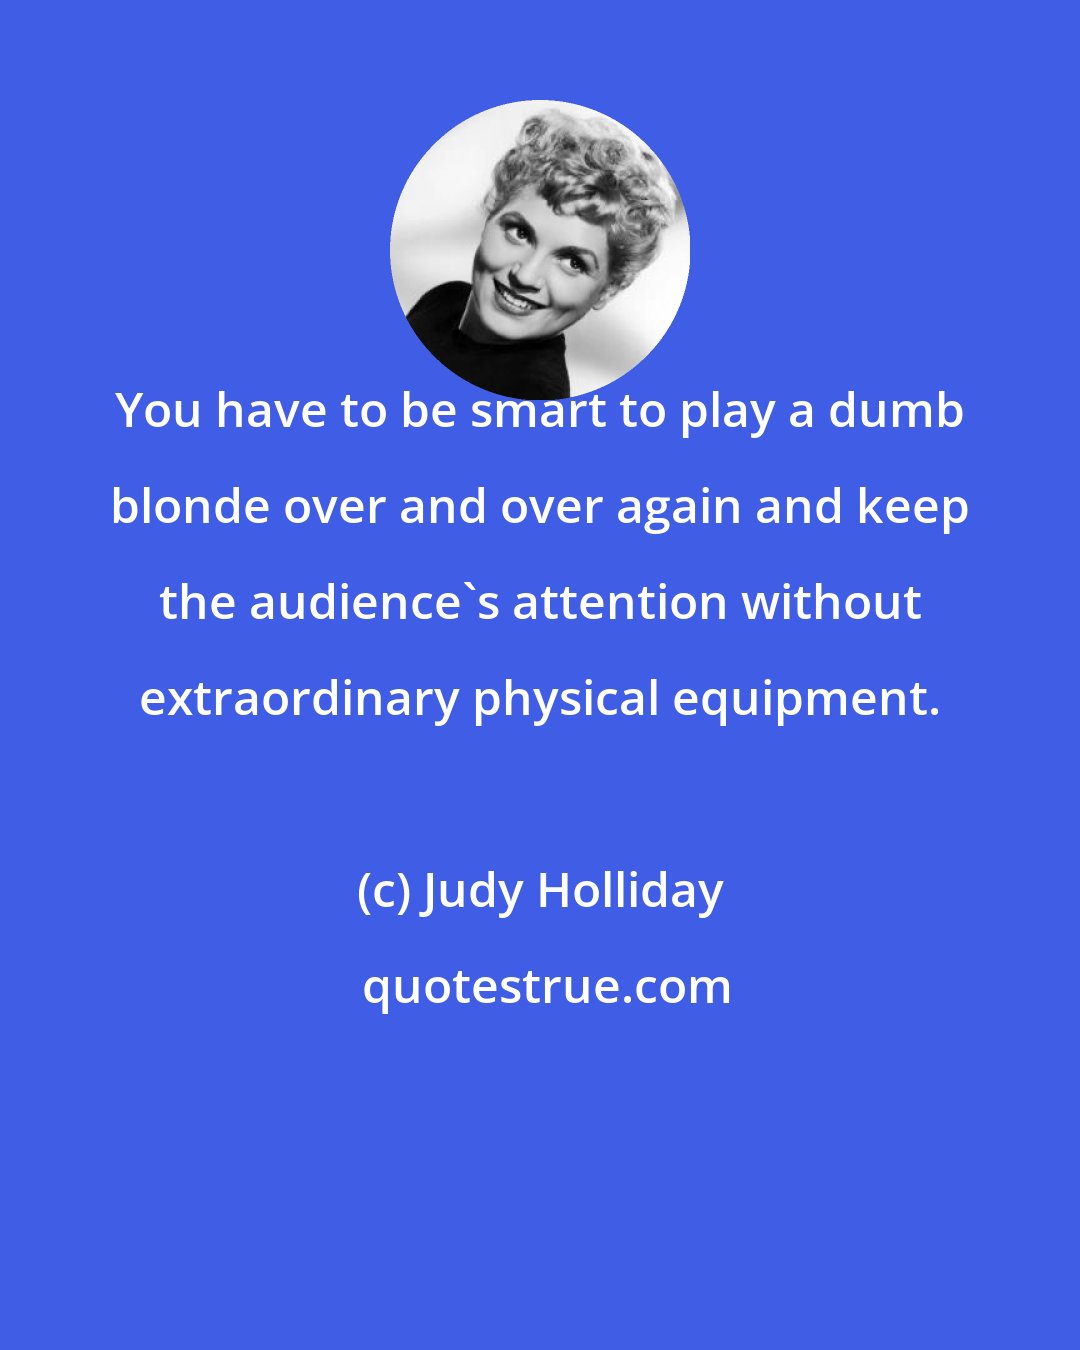 Judy Holliday: You have to be smart to play a dumb blonde over and over again and keep the audience's attention without extraordinary physical equipment.